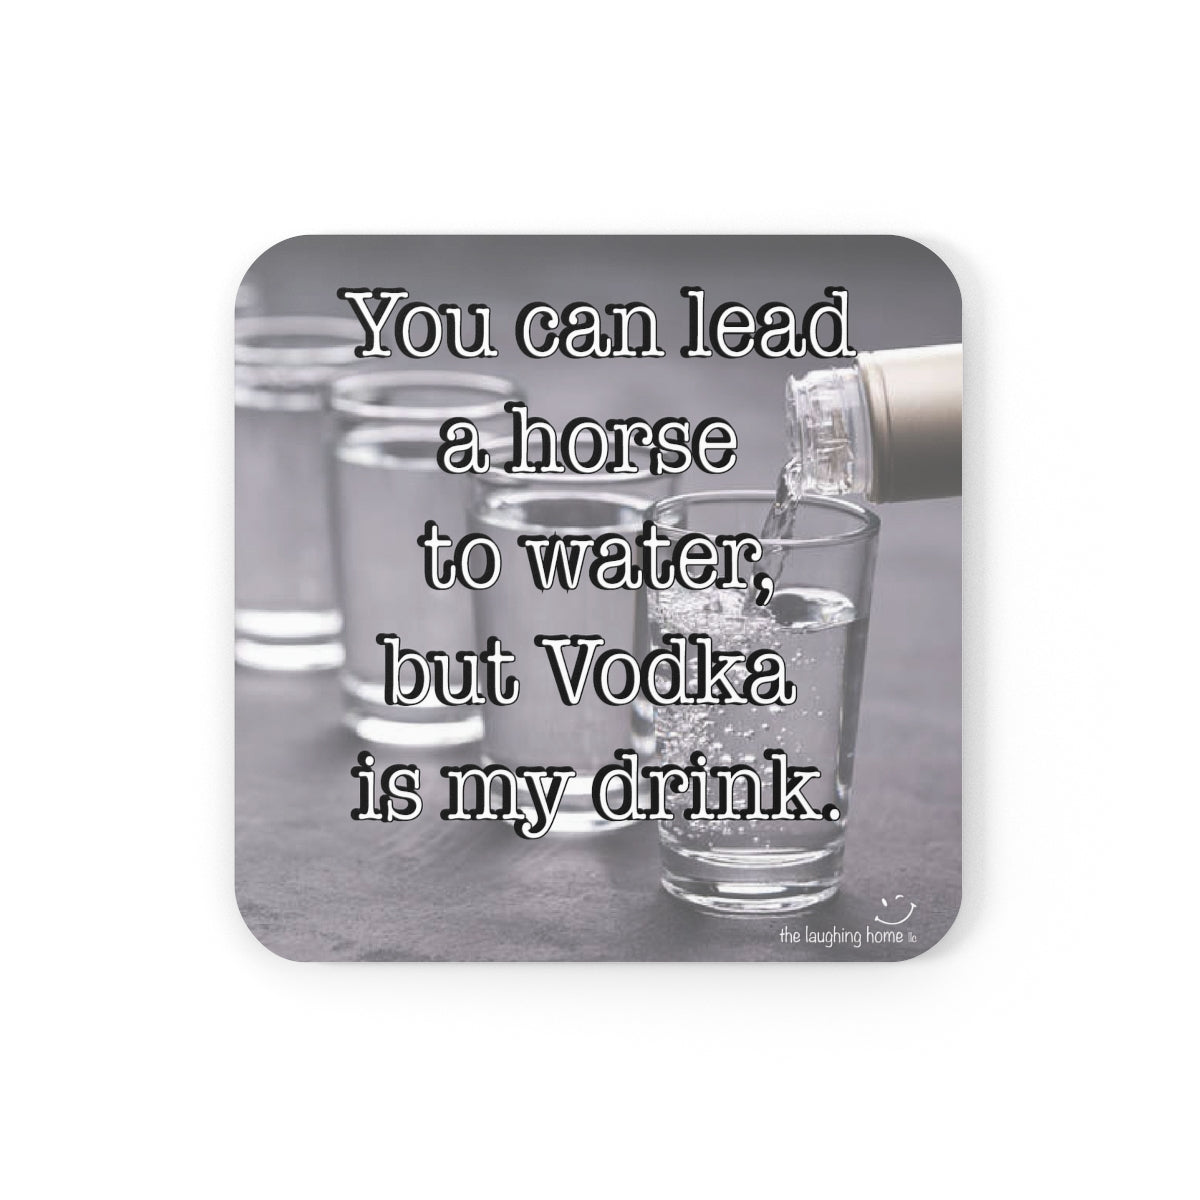 You can lead a horse to water Corkwood Coaster Set of 4